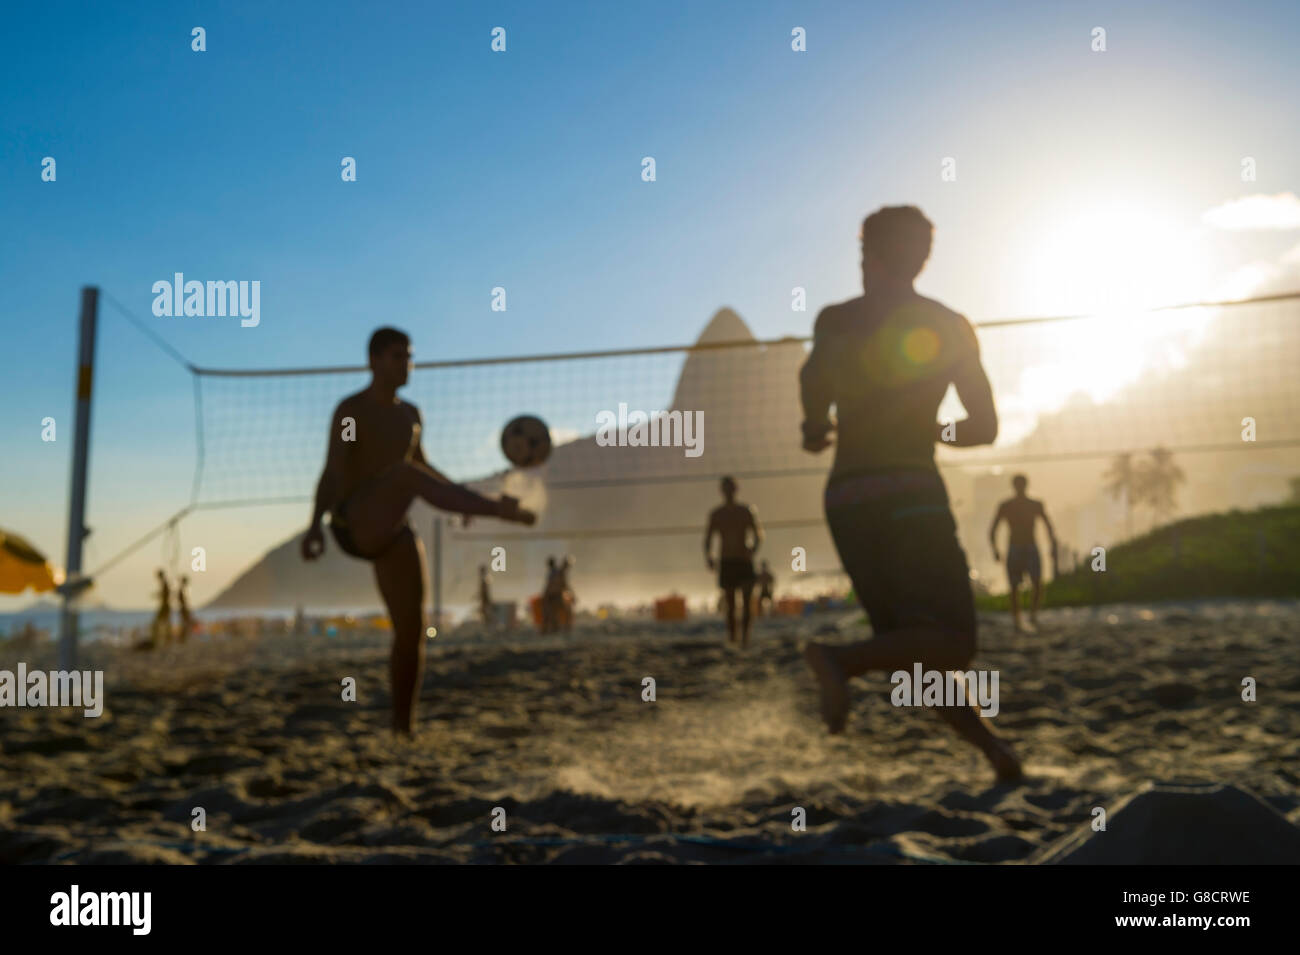 Defocused scene of silhouettes of Brazilians playing futevolei (footvolley) against a sunset backdrop on Ipanema Beach Stock Photo